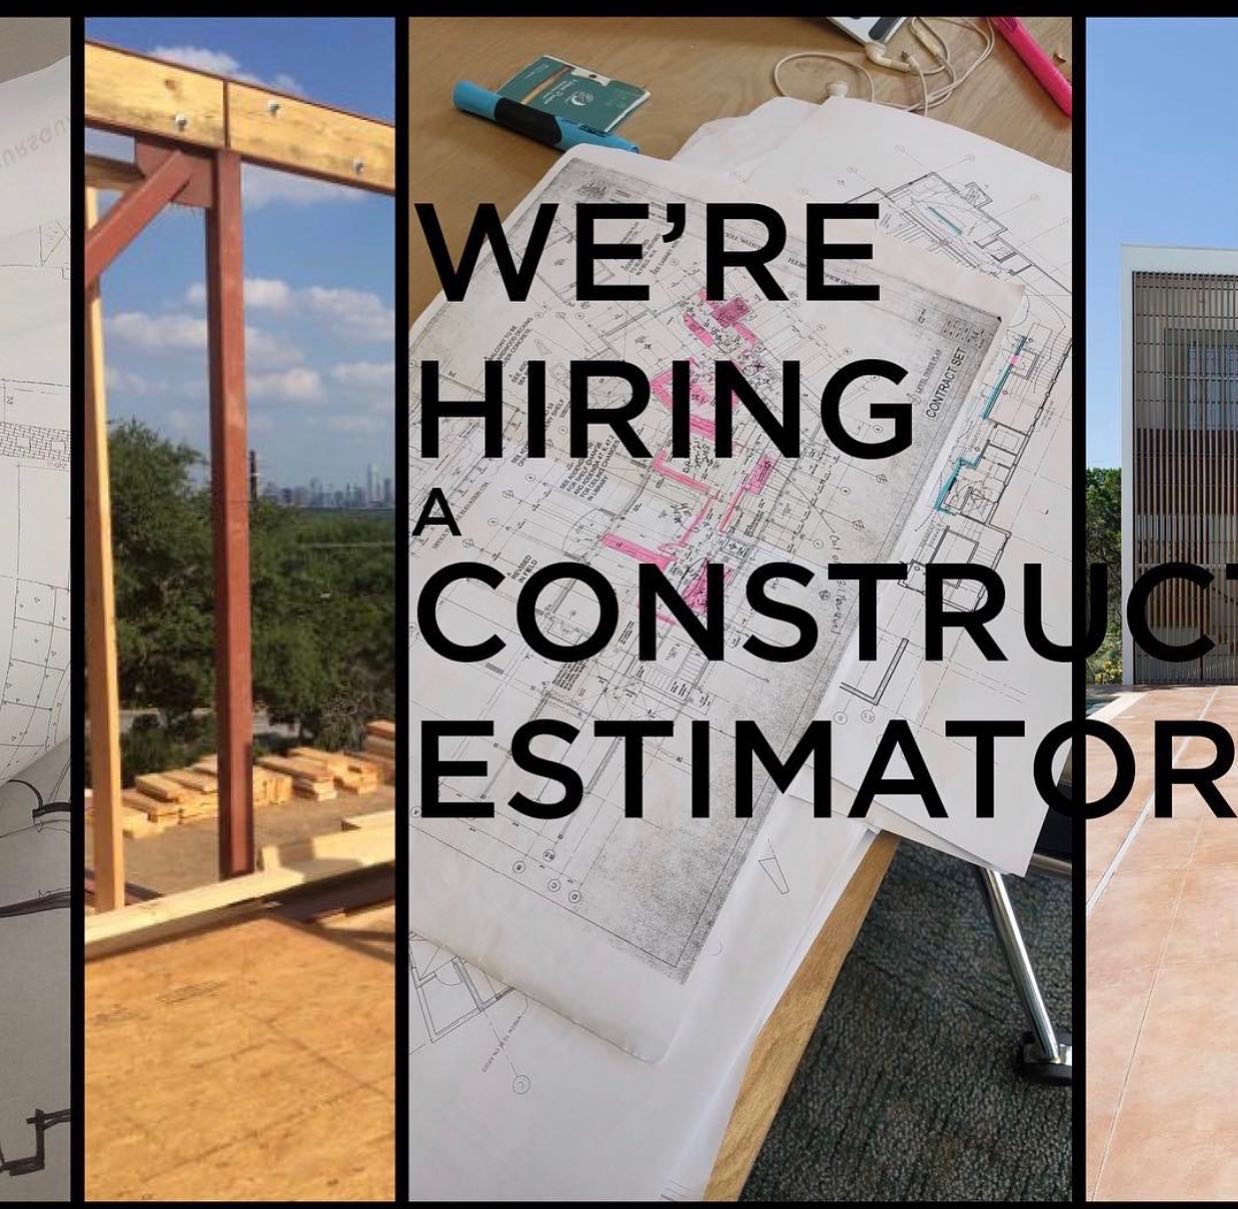 We’re in search for a great team member who’s dedicated to the craft of construction estimating. If you or someone you know is looking to work on challenging architecturally significant projects then please contact us.